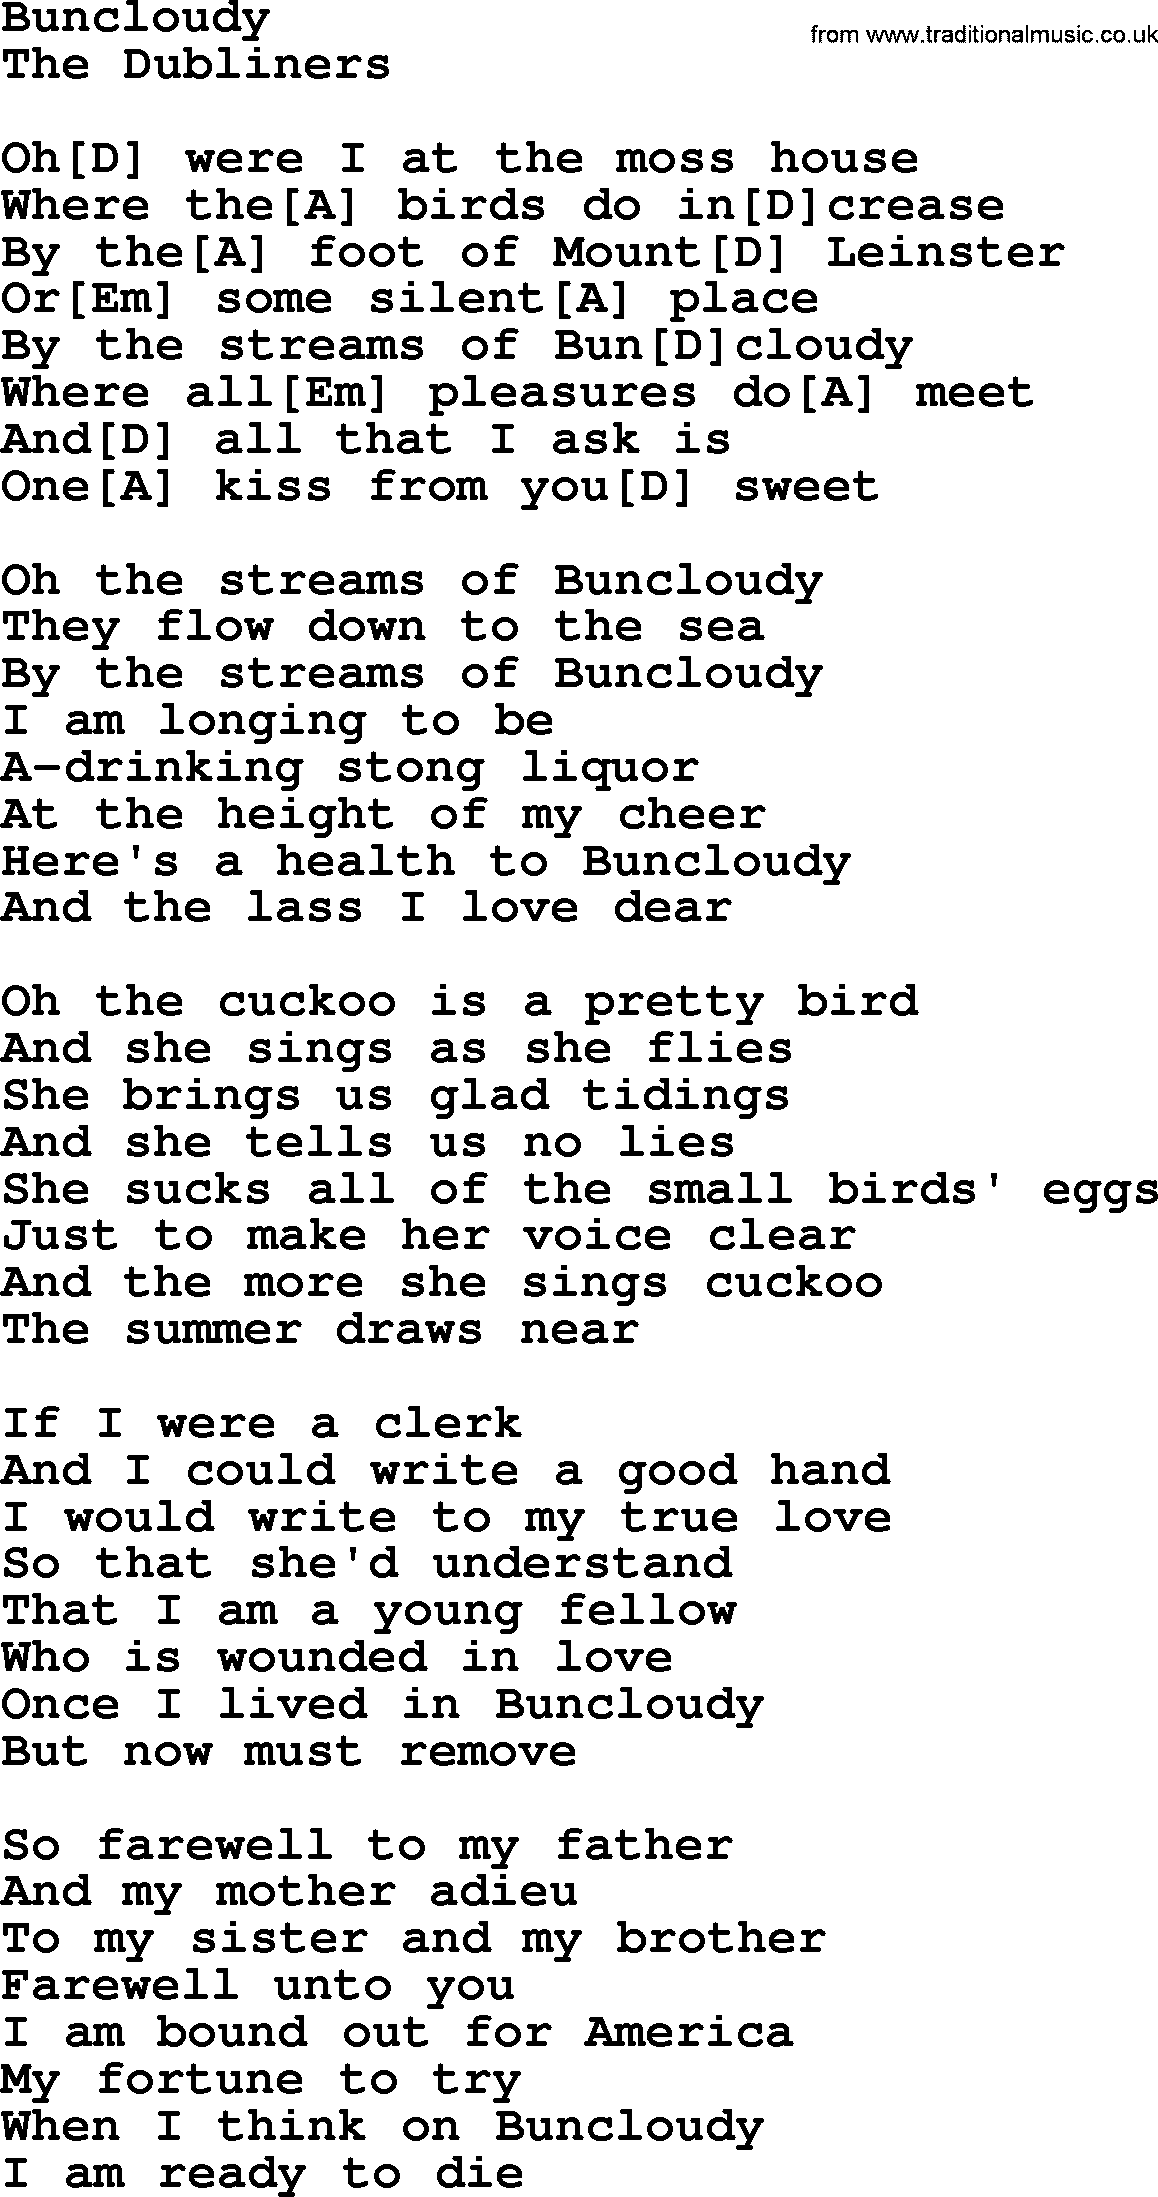 The Dubliners song: Buncloudy, lyrics and chords